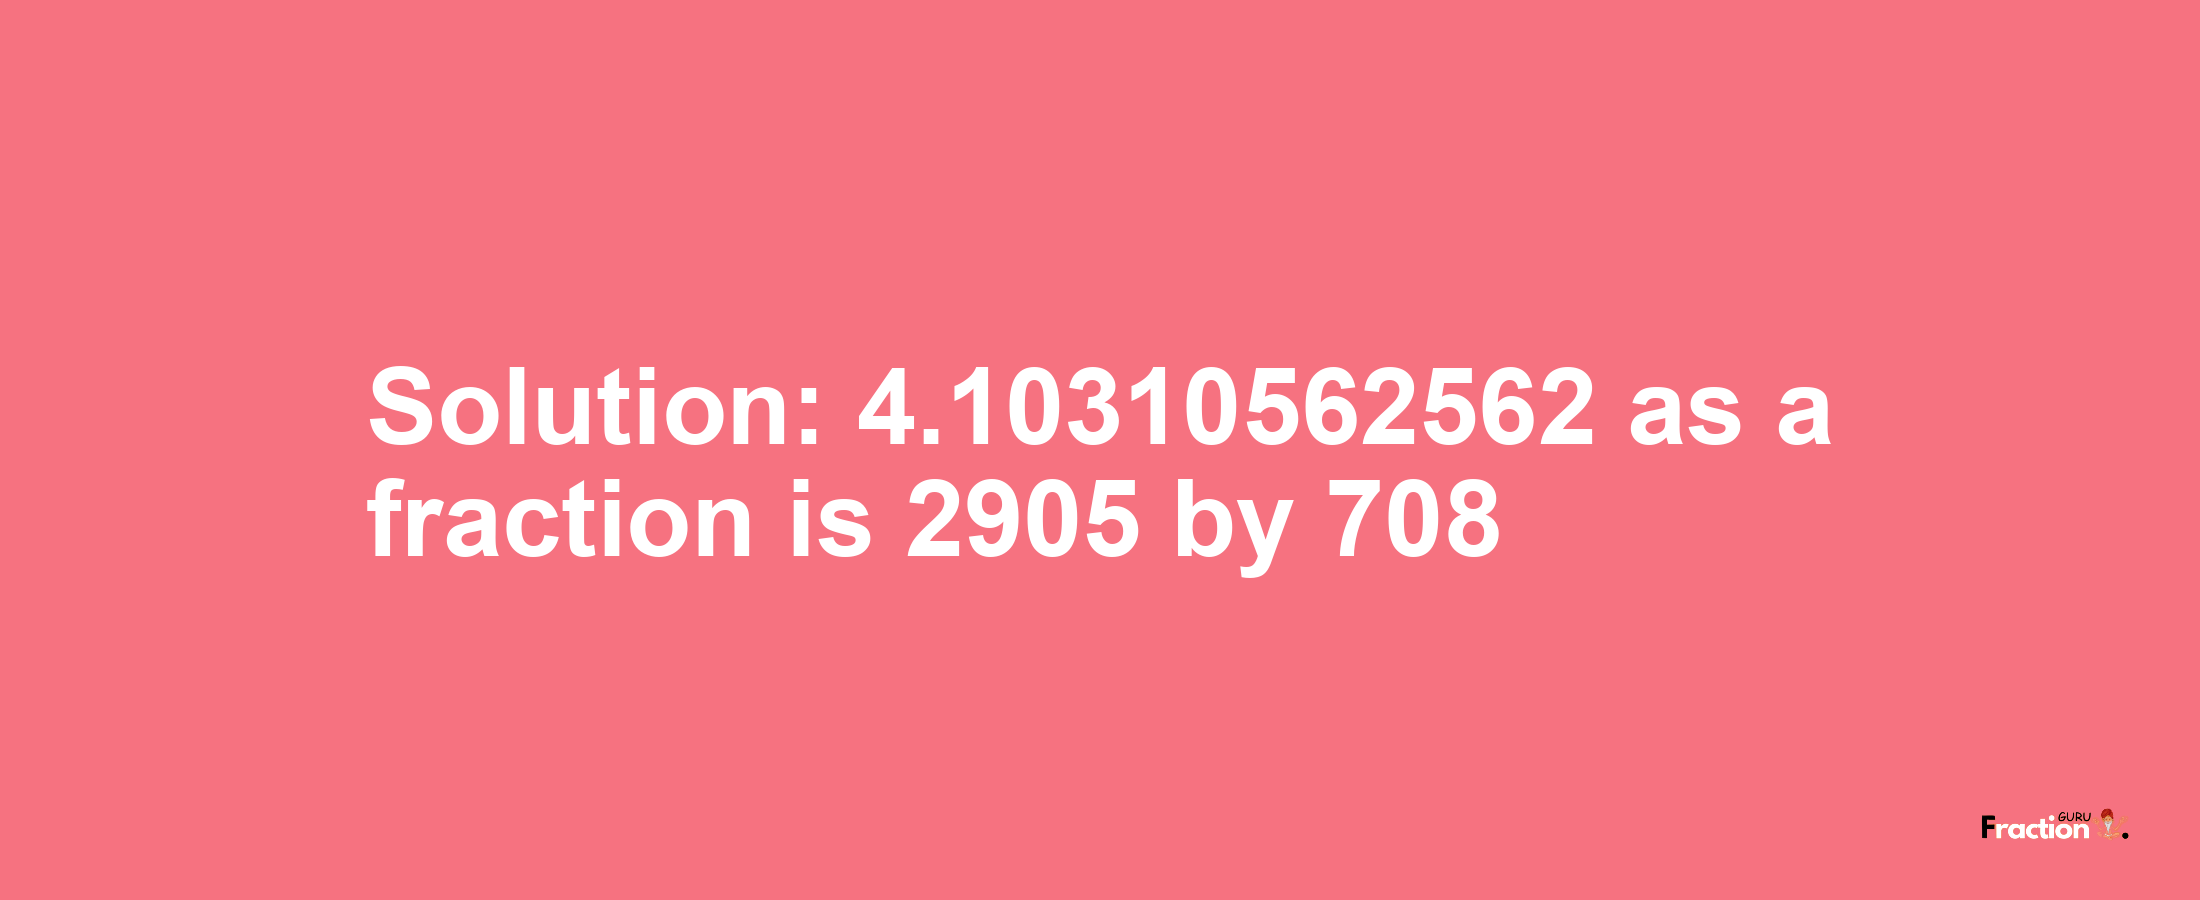 Solution:4.10310562562 as a fraction is 2905/708